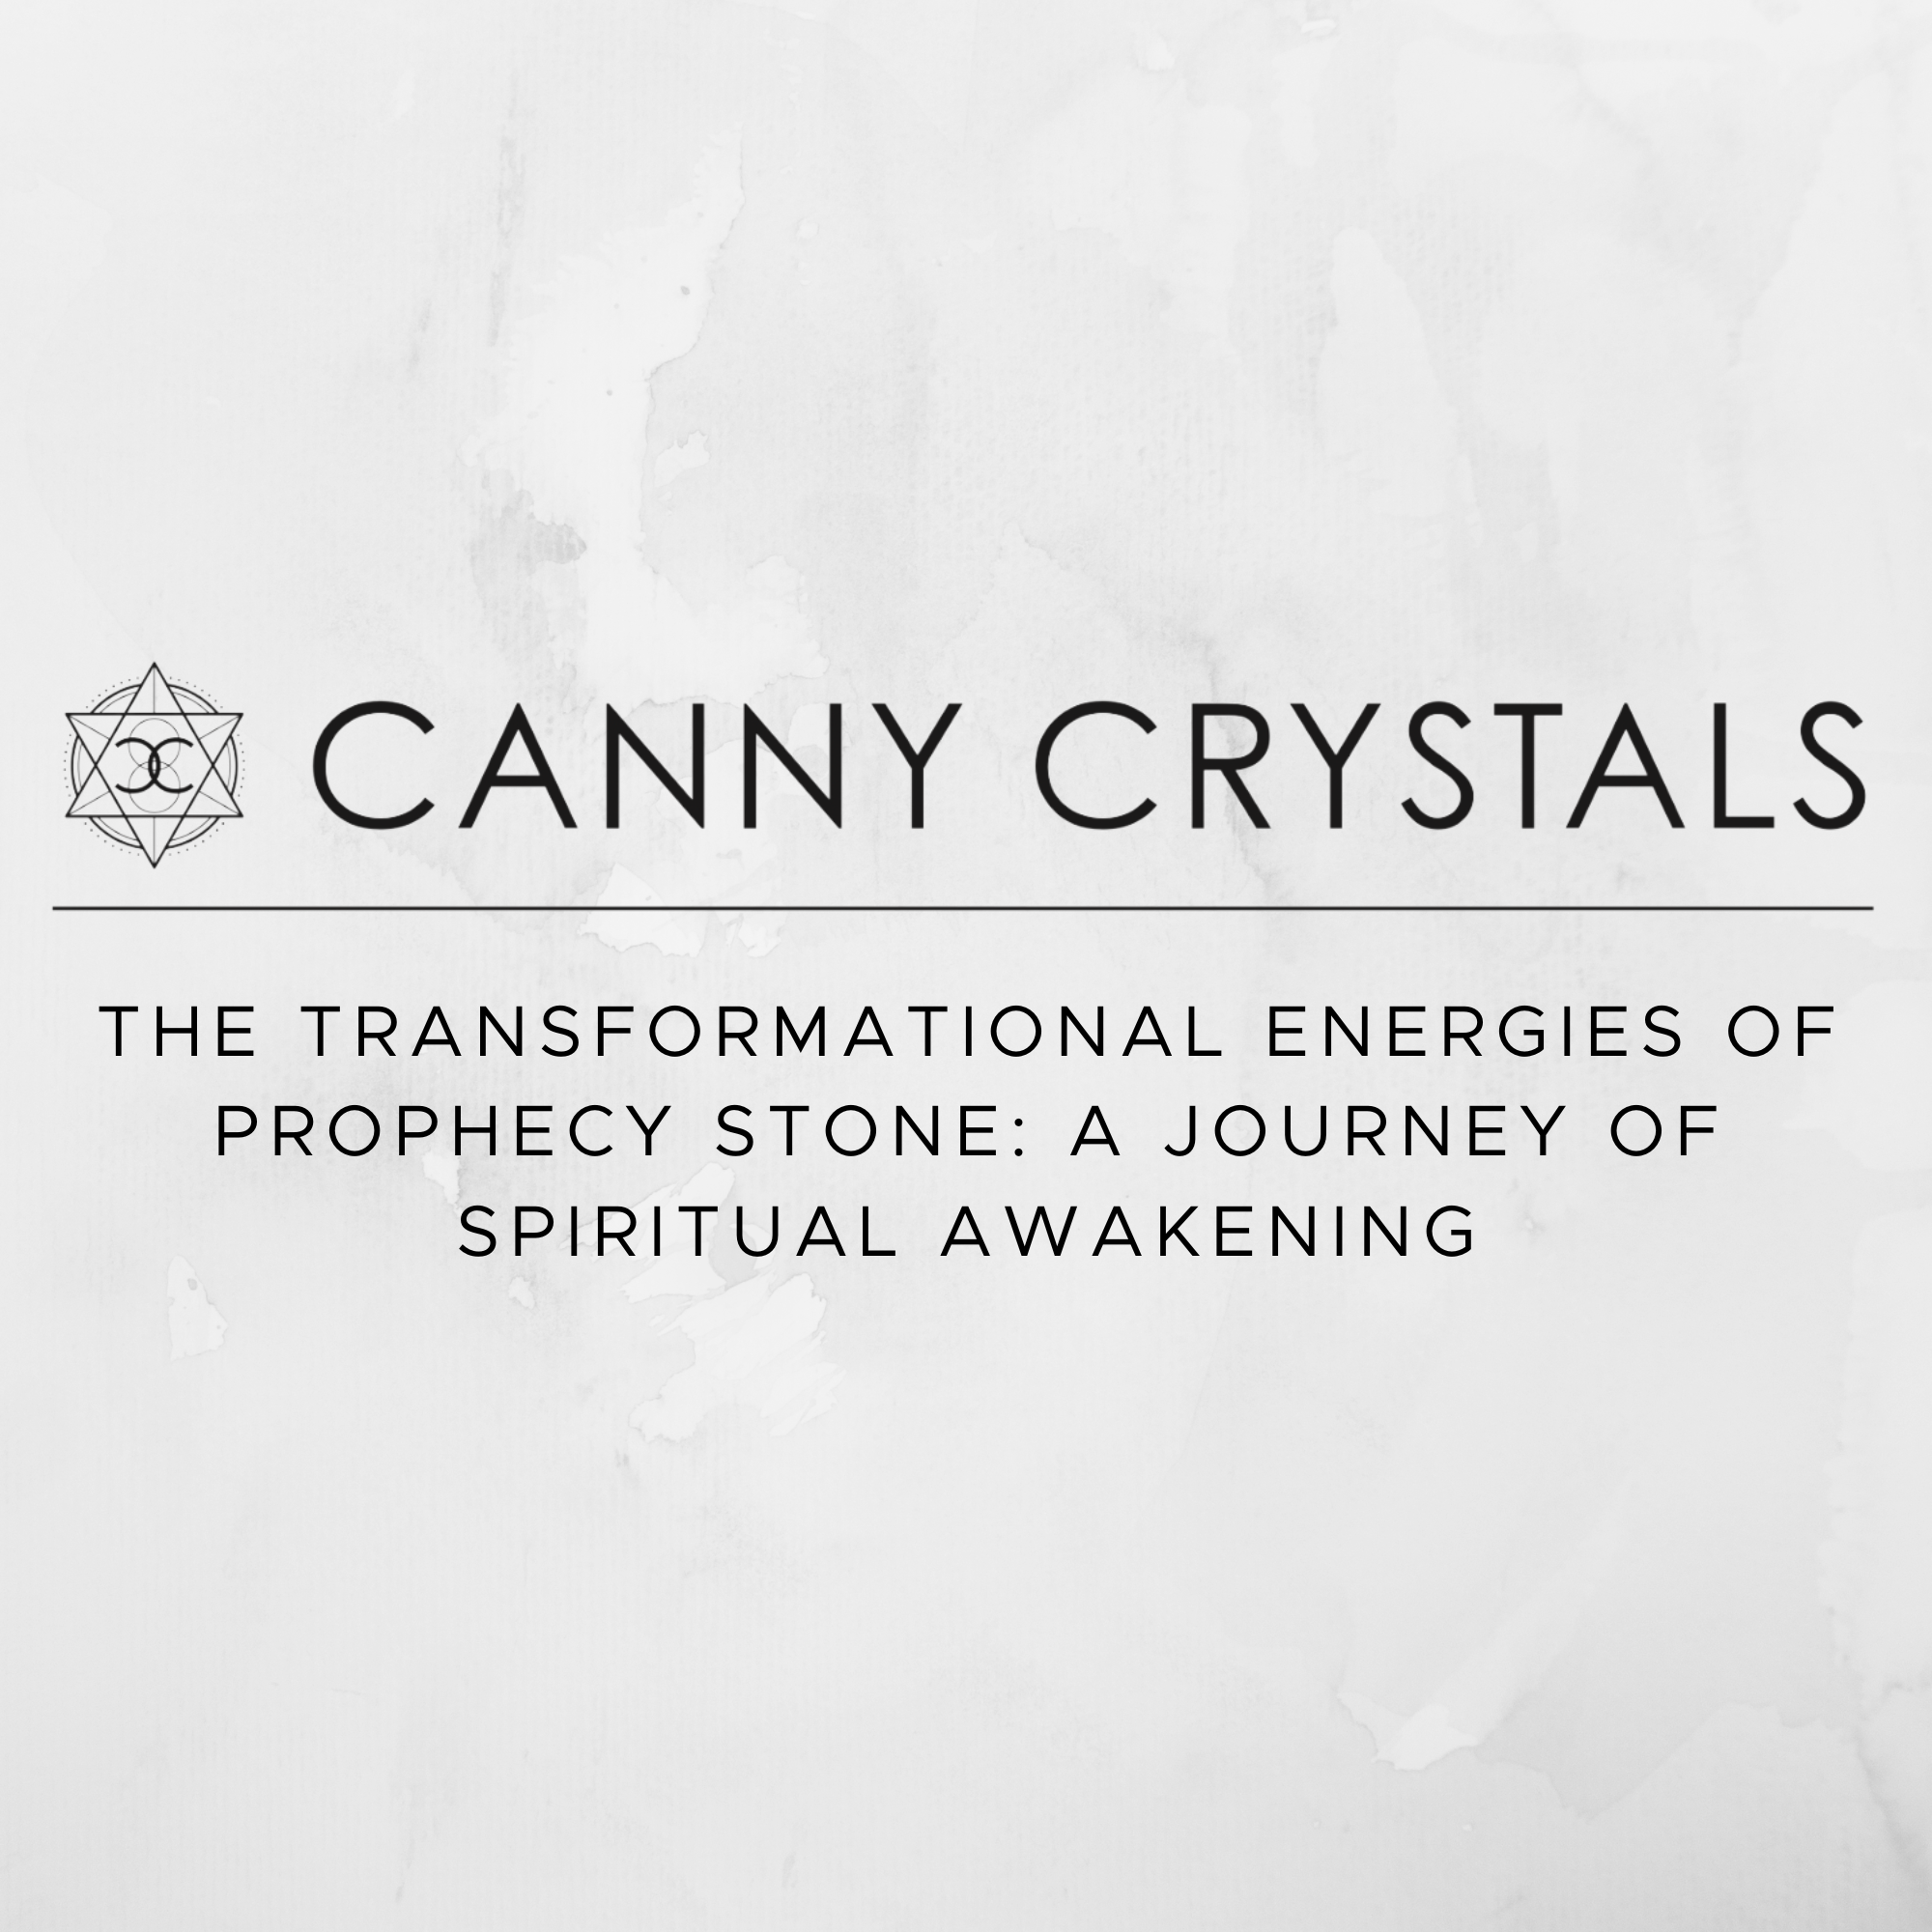 The Transformational Energies of Prophecy Stone: A Journey of Spiritual Awakening